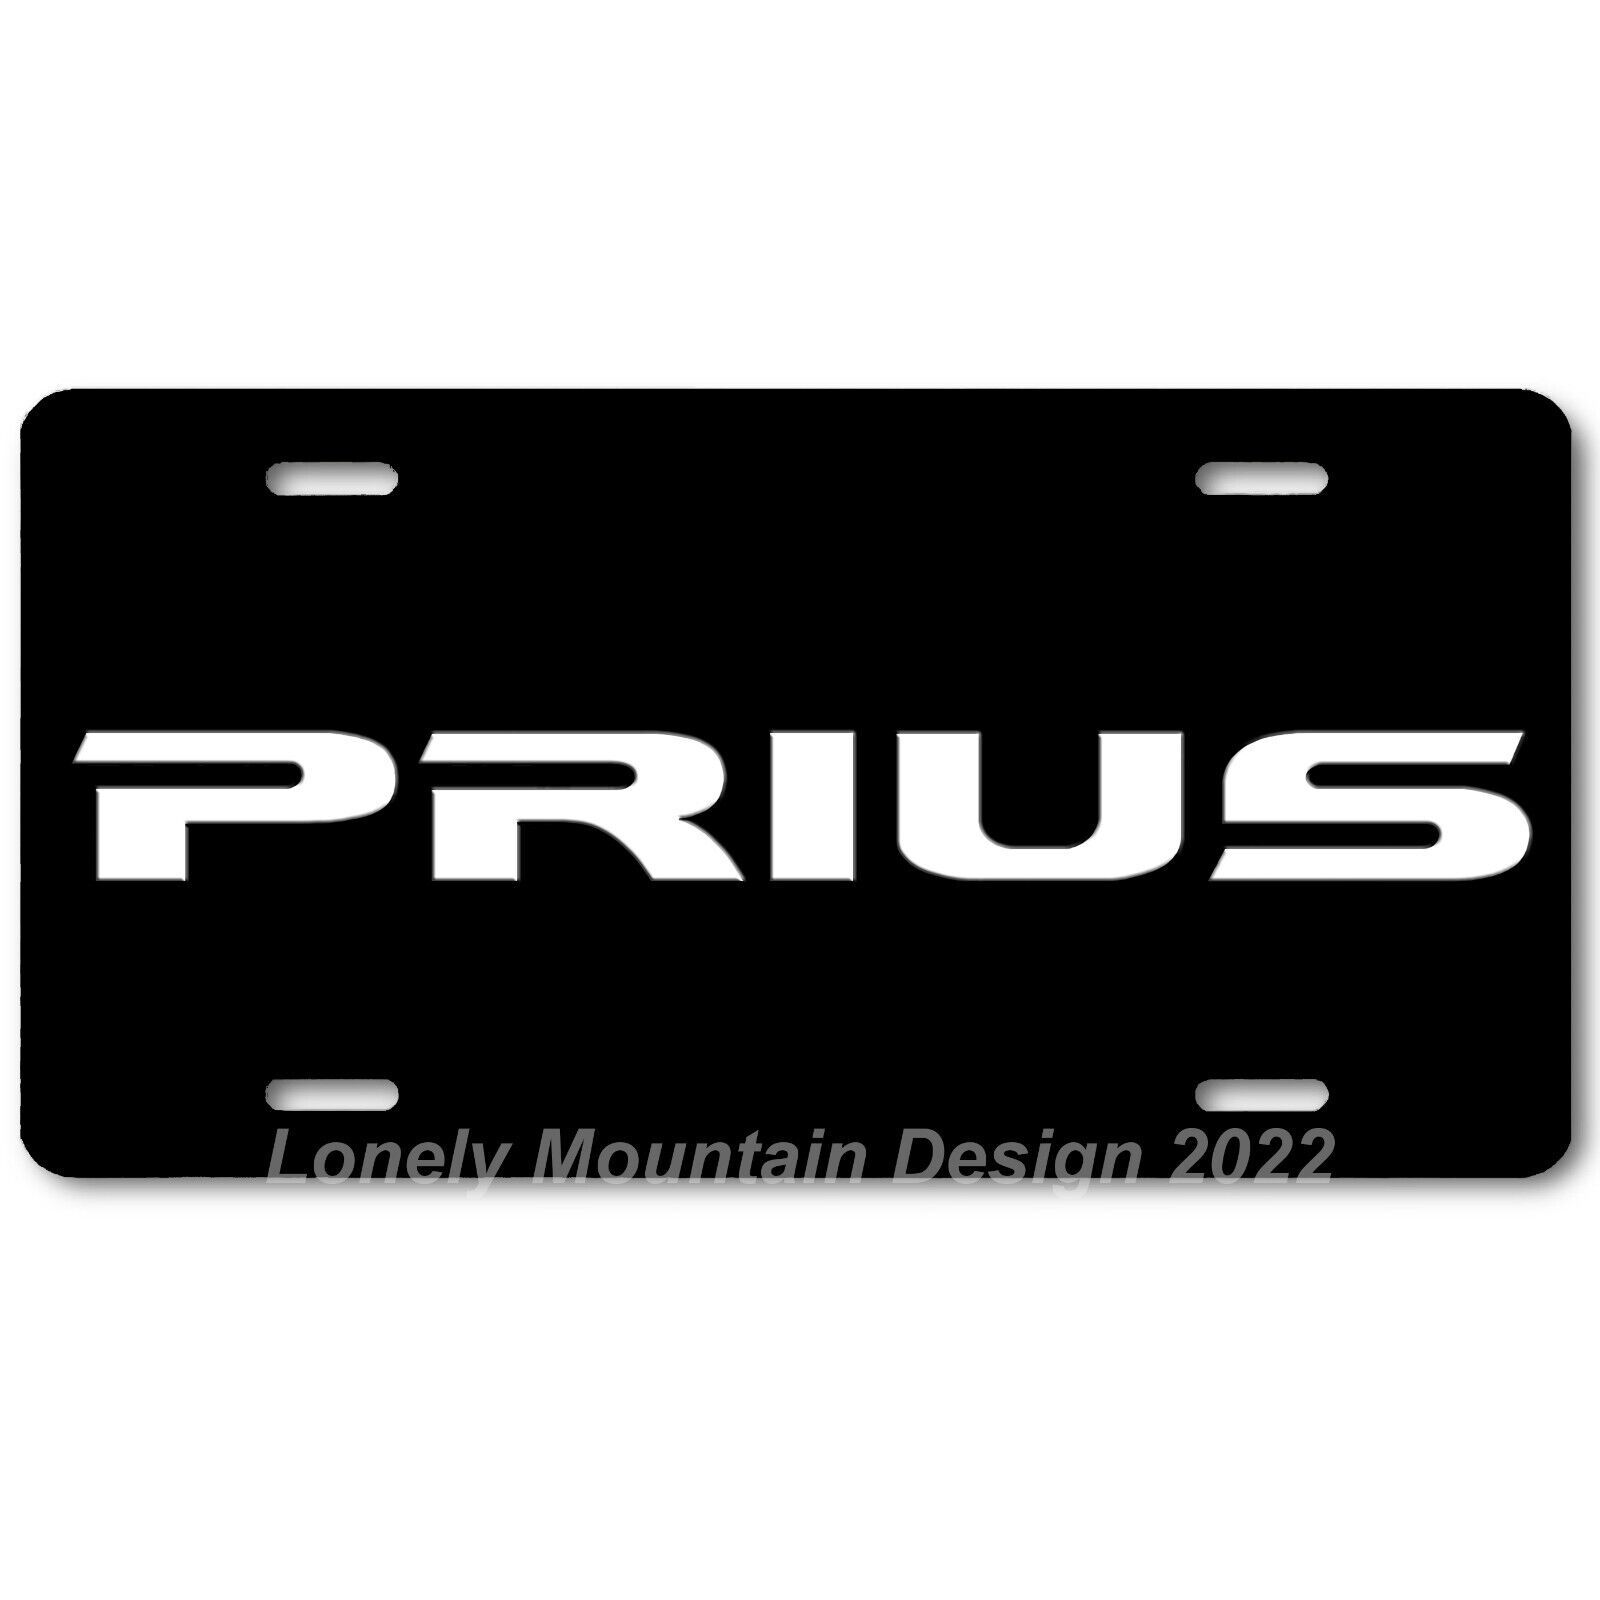 Primary image for Toyota Prius Inspired Art White on Black FLAT Aluminum Novelty License Tag Plate